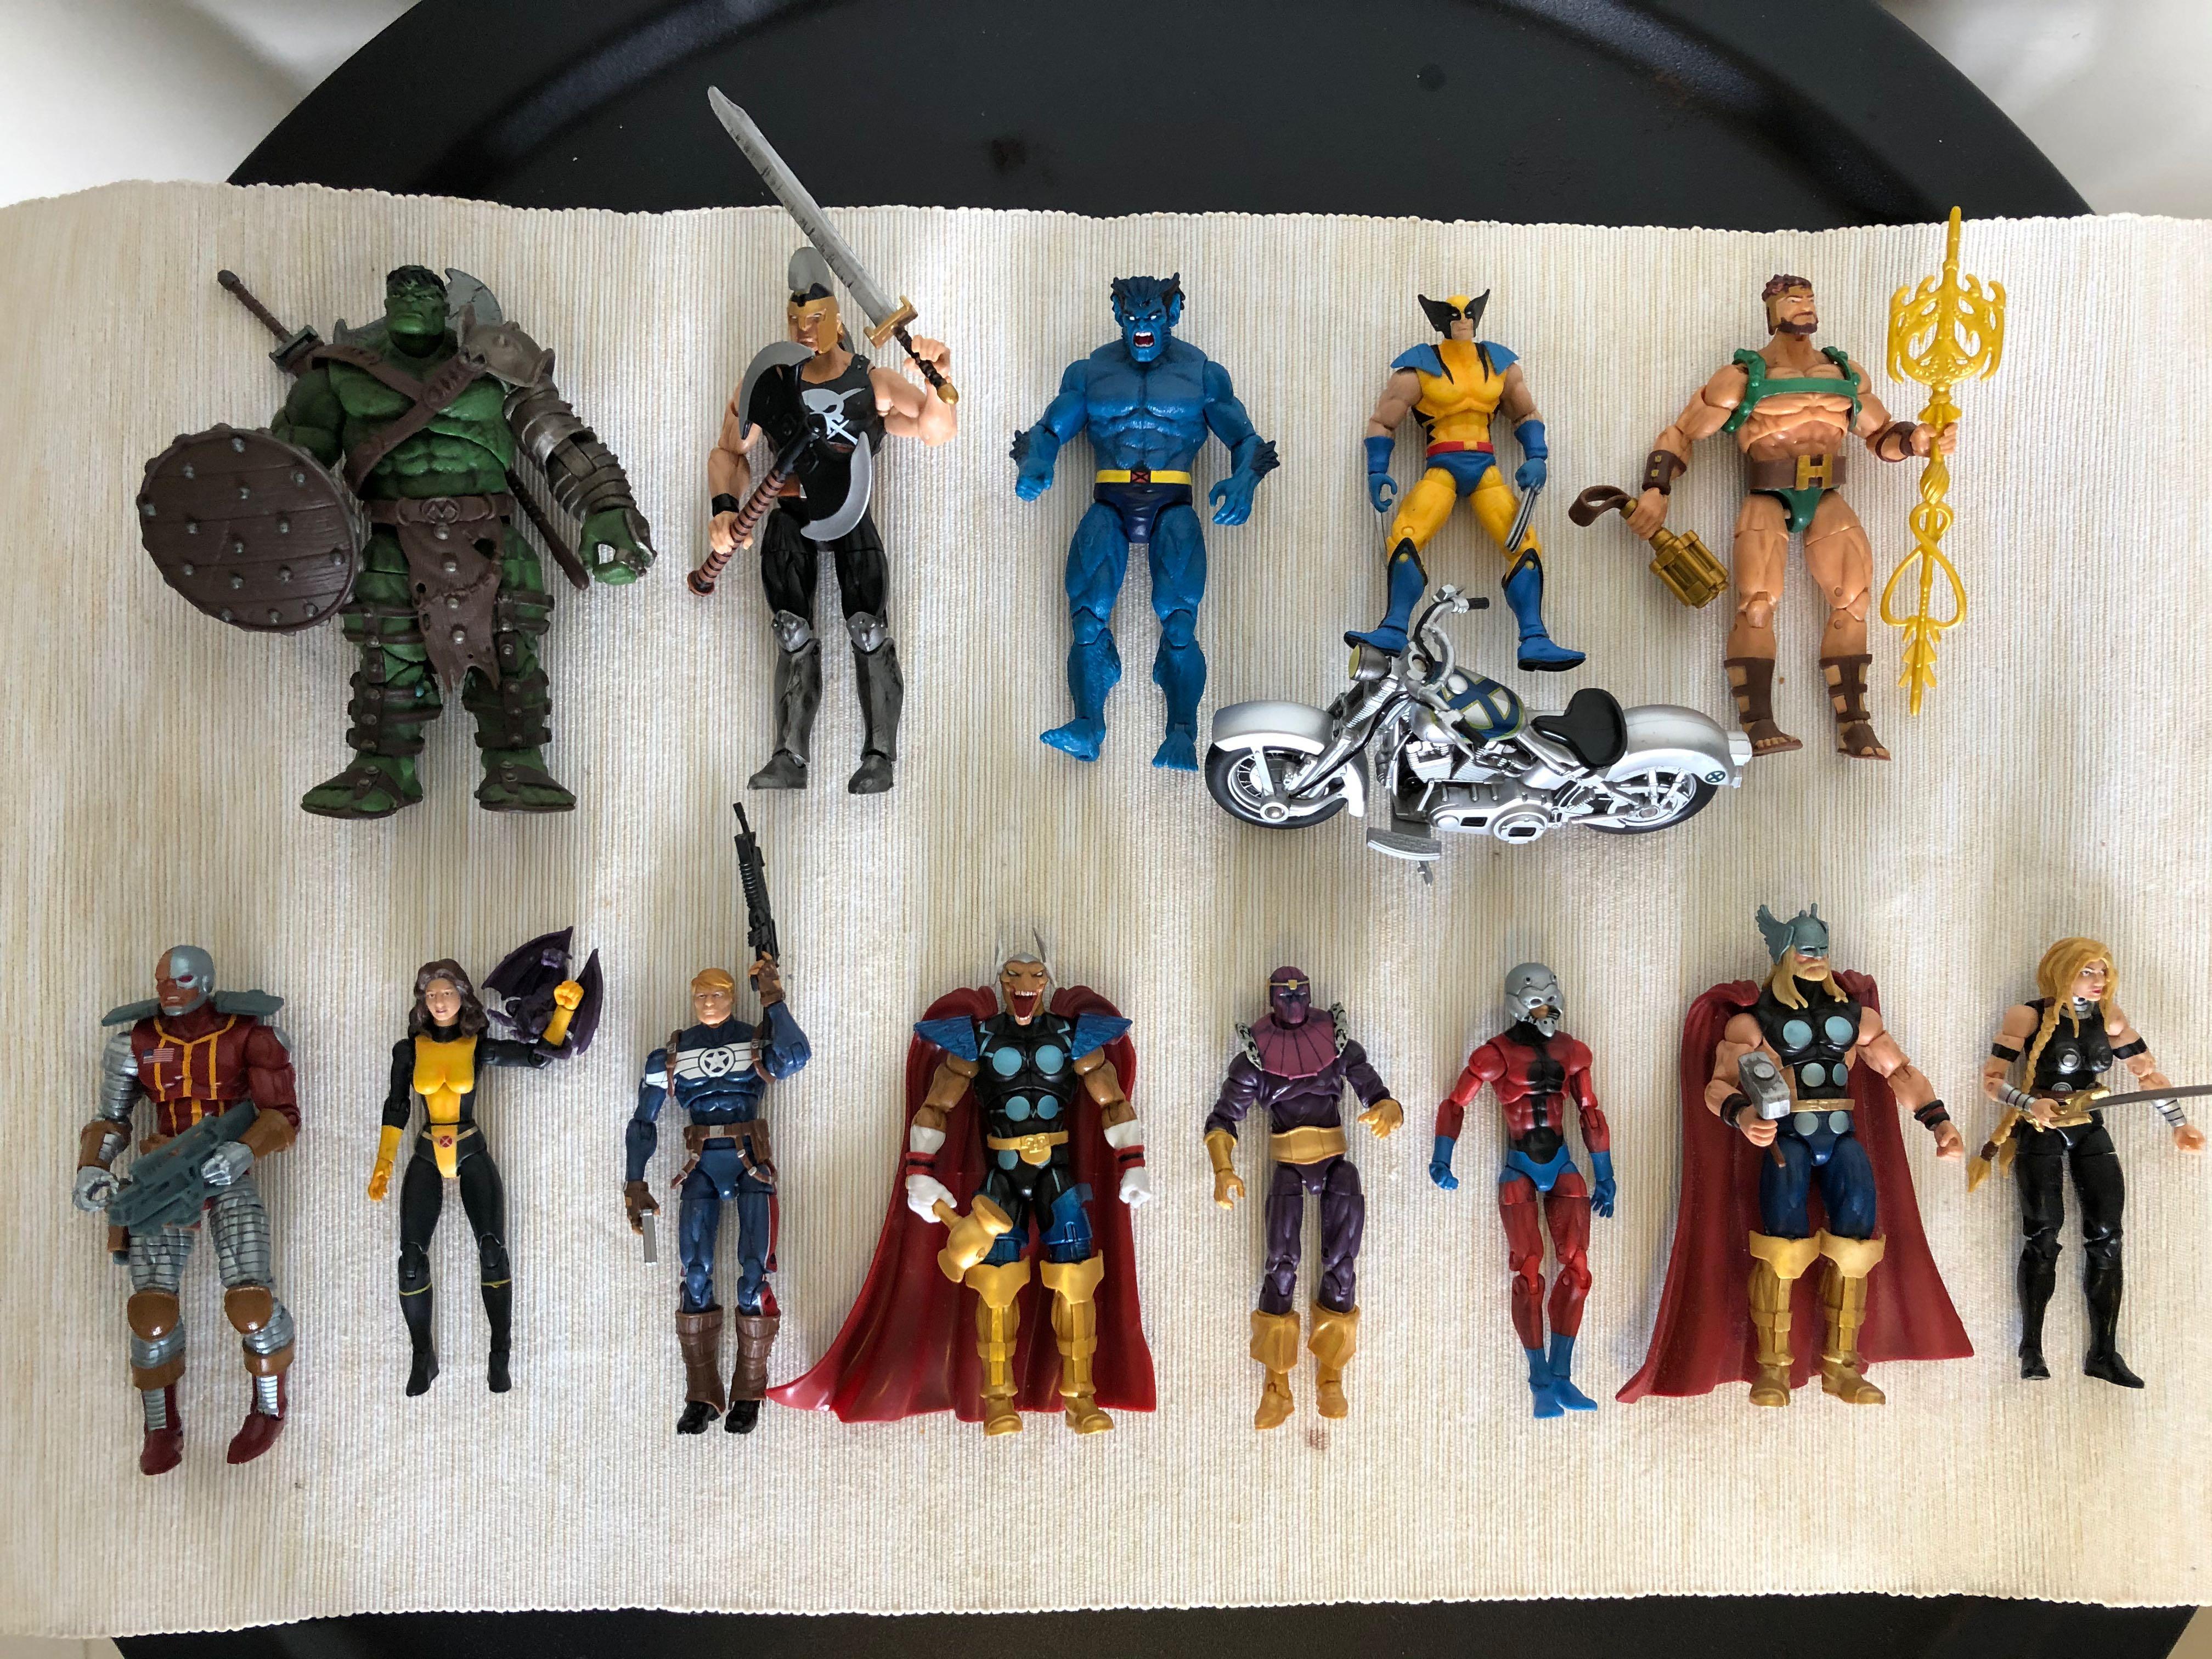 3.75 inch marvel action figures